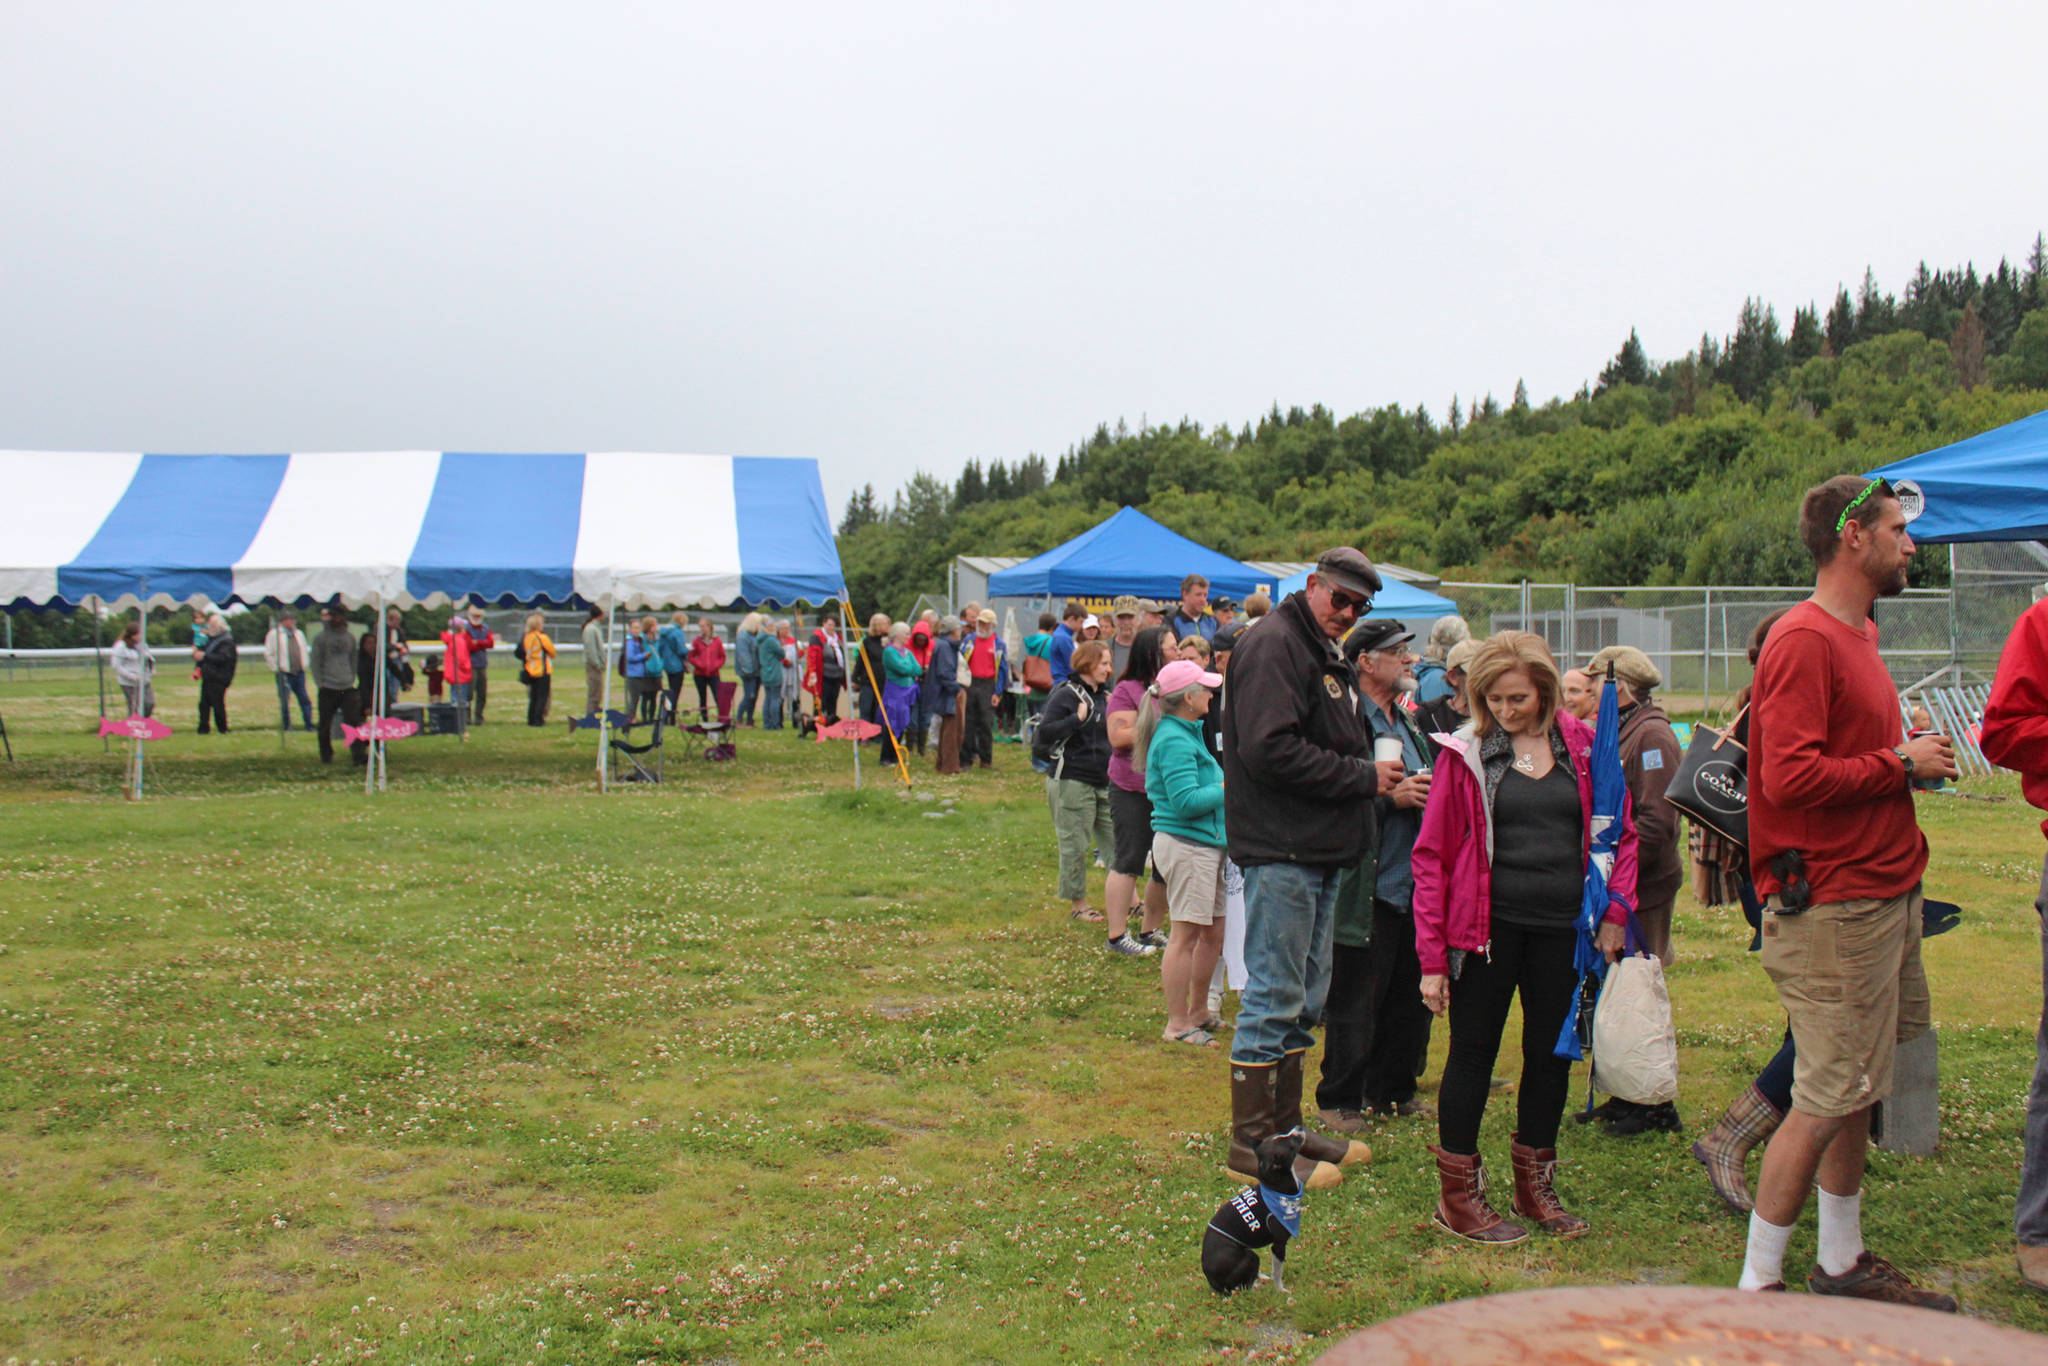 Area residents wait in a line that snakes around Karen Hornaday Park for some grilled salmon during a barbecue for Wild Alaska Salmon Day, held Friday, Aug. 10, 2018 at the park in Homer, Alaska. (File Photo by Megan Pacer/Homer News)